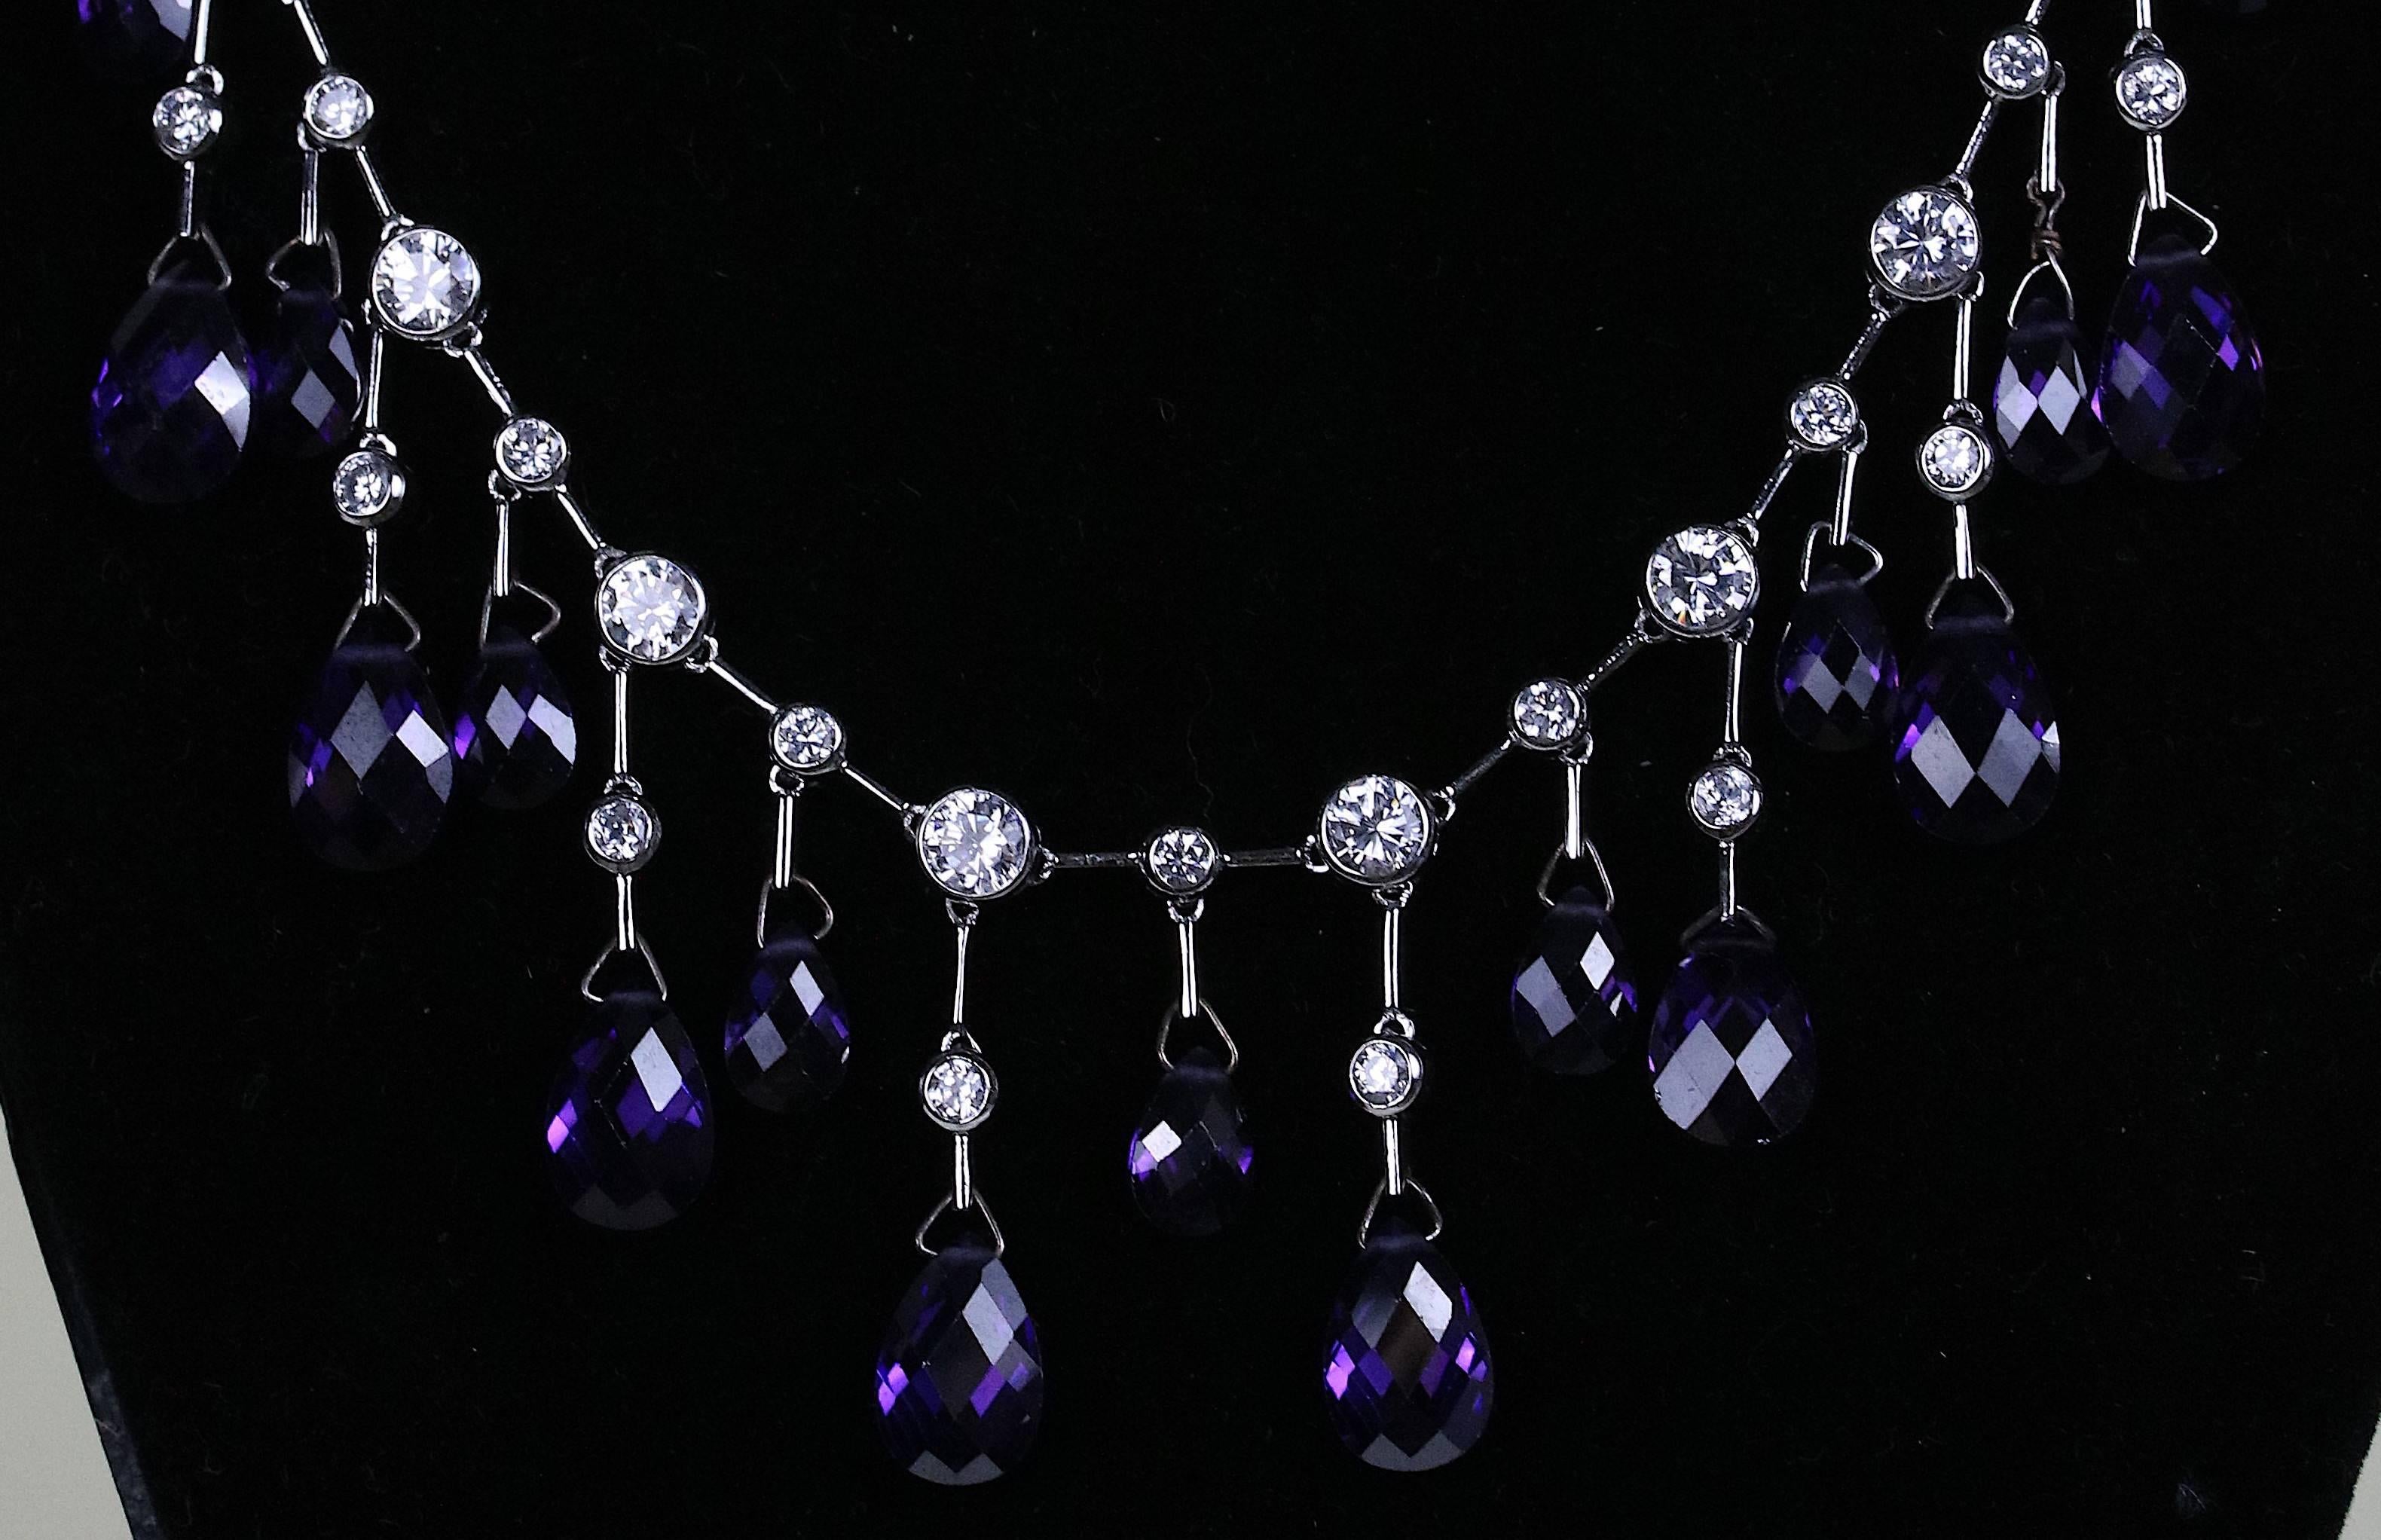 Stunning modernist fringe sterling silver necklace, featuring 16 amethyst briolettes drops; each drop holding one teardrop Briolette and a round CZ, the necklace banded with inter-spaced small and large round CZ's with a sterling silver bar chain